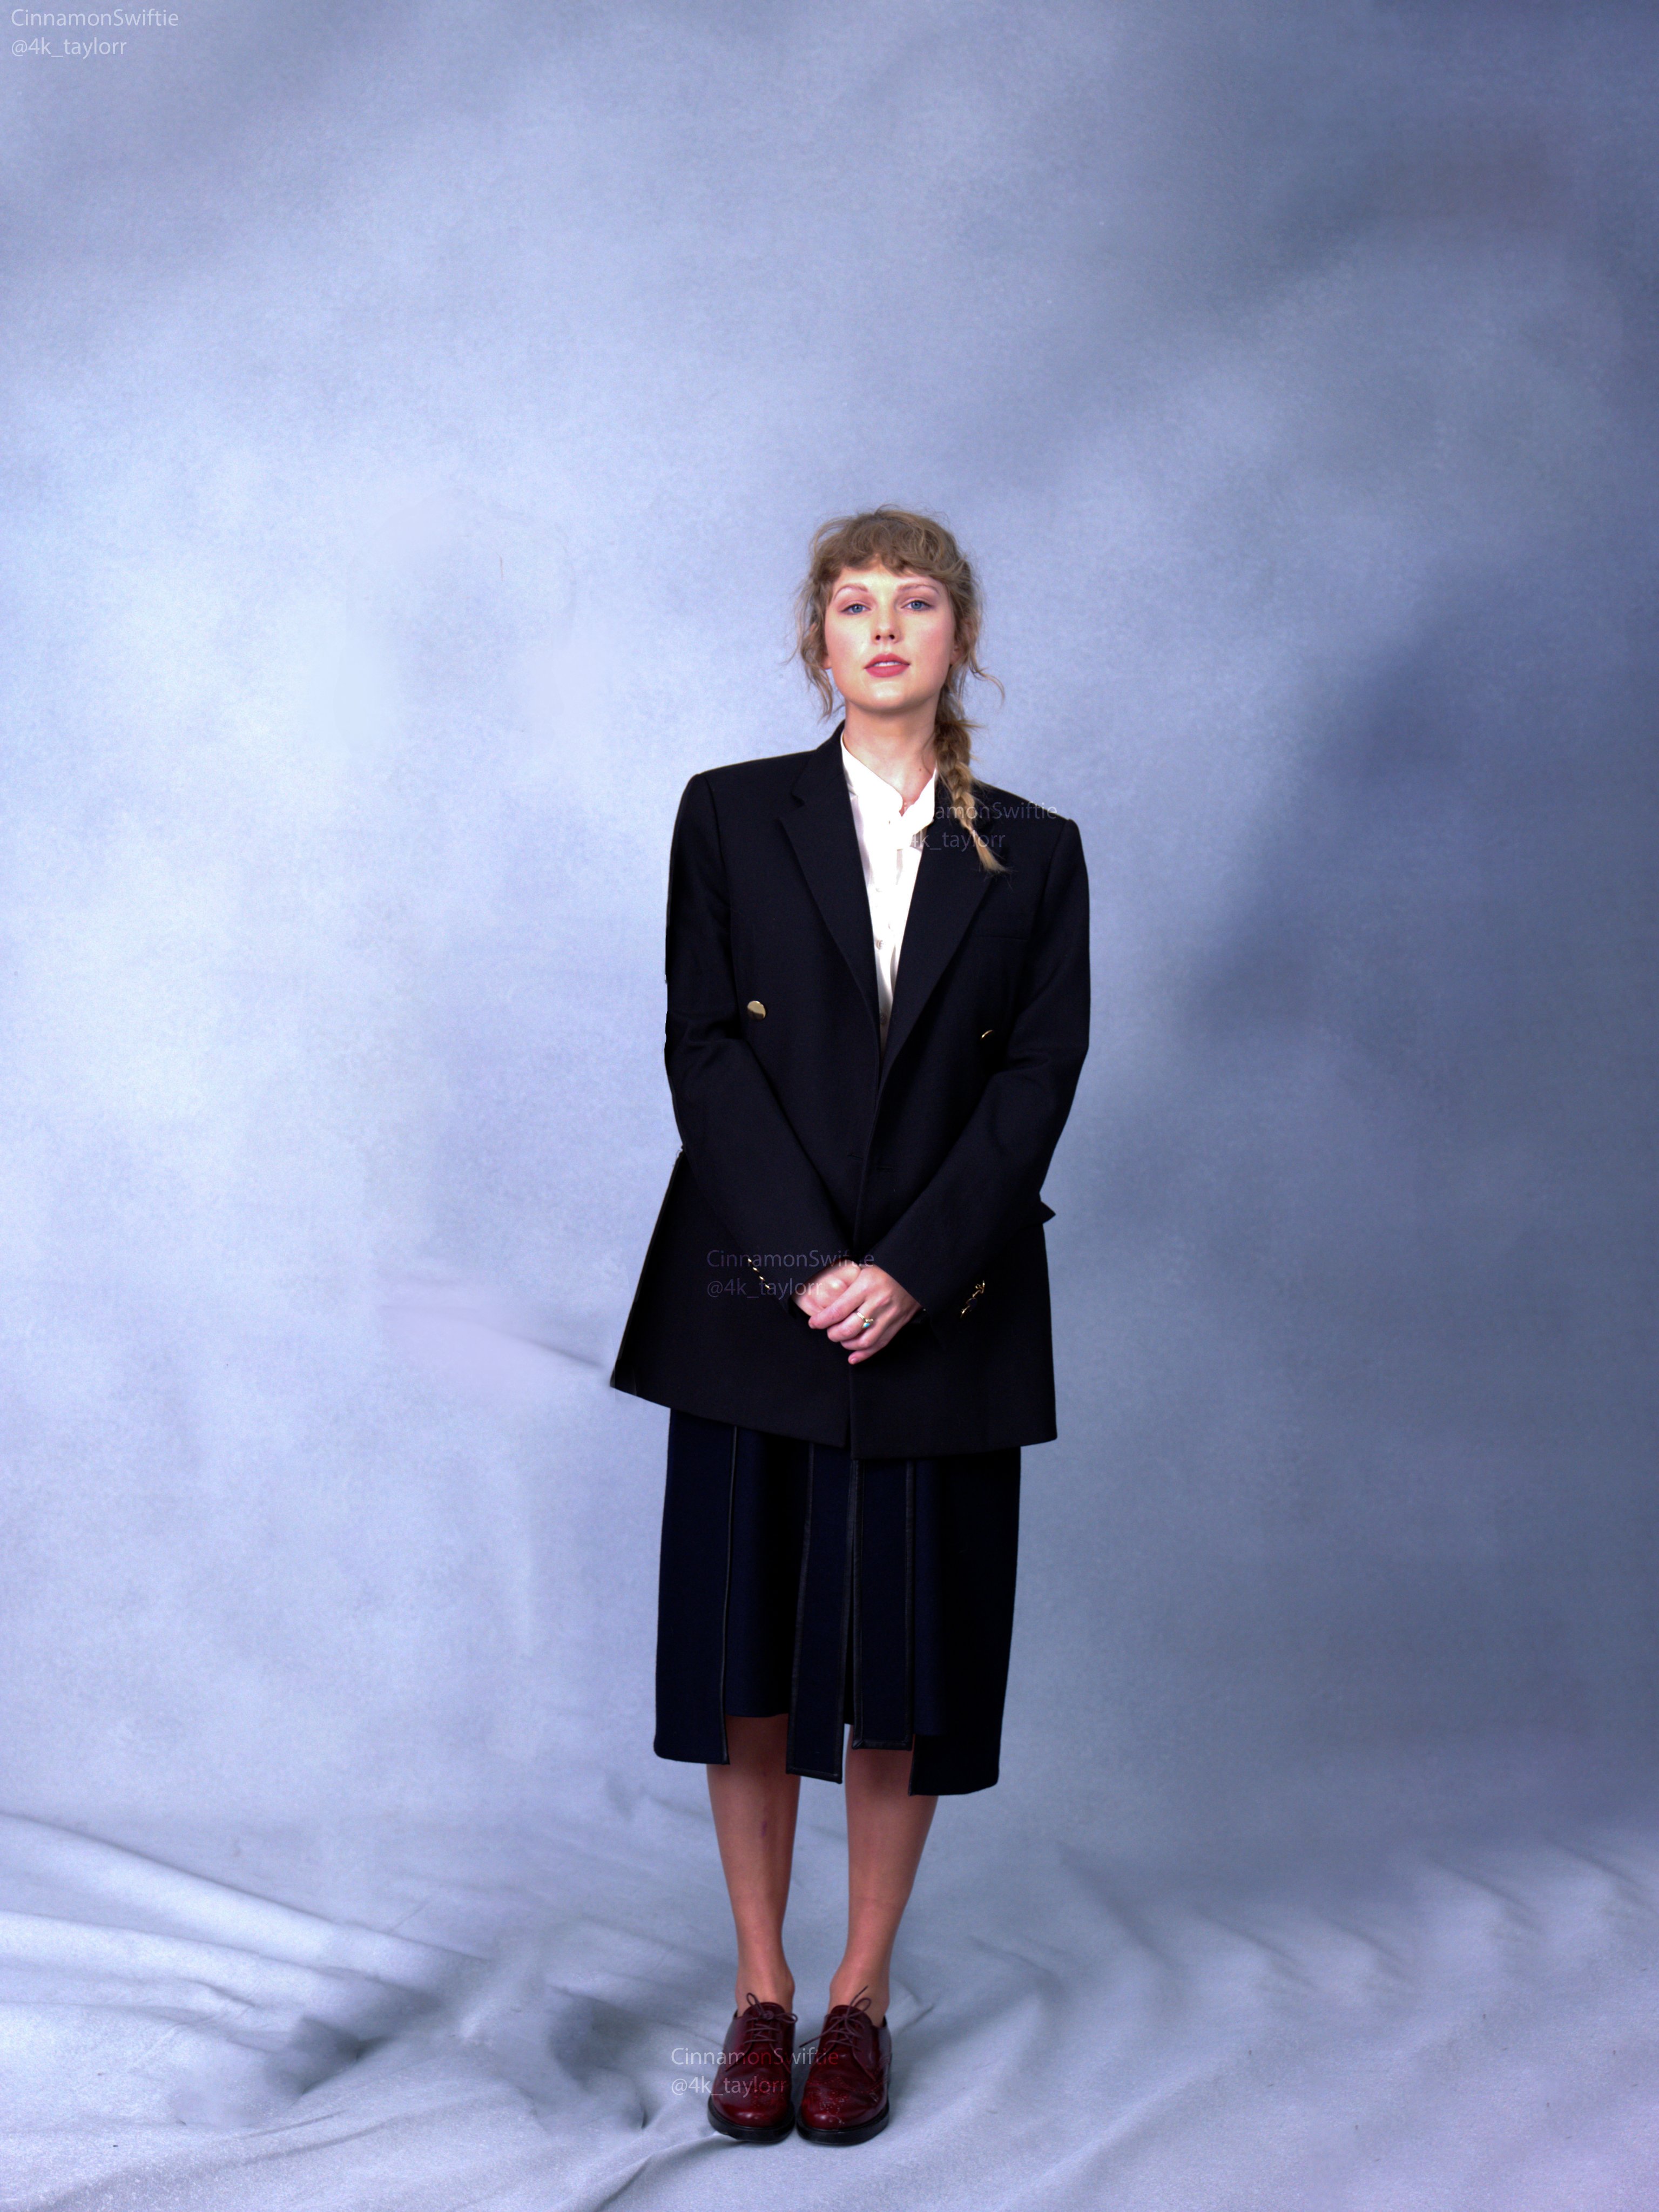 Taylor Swift on Style: Outtakes 